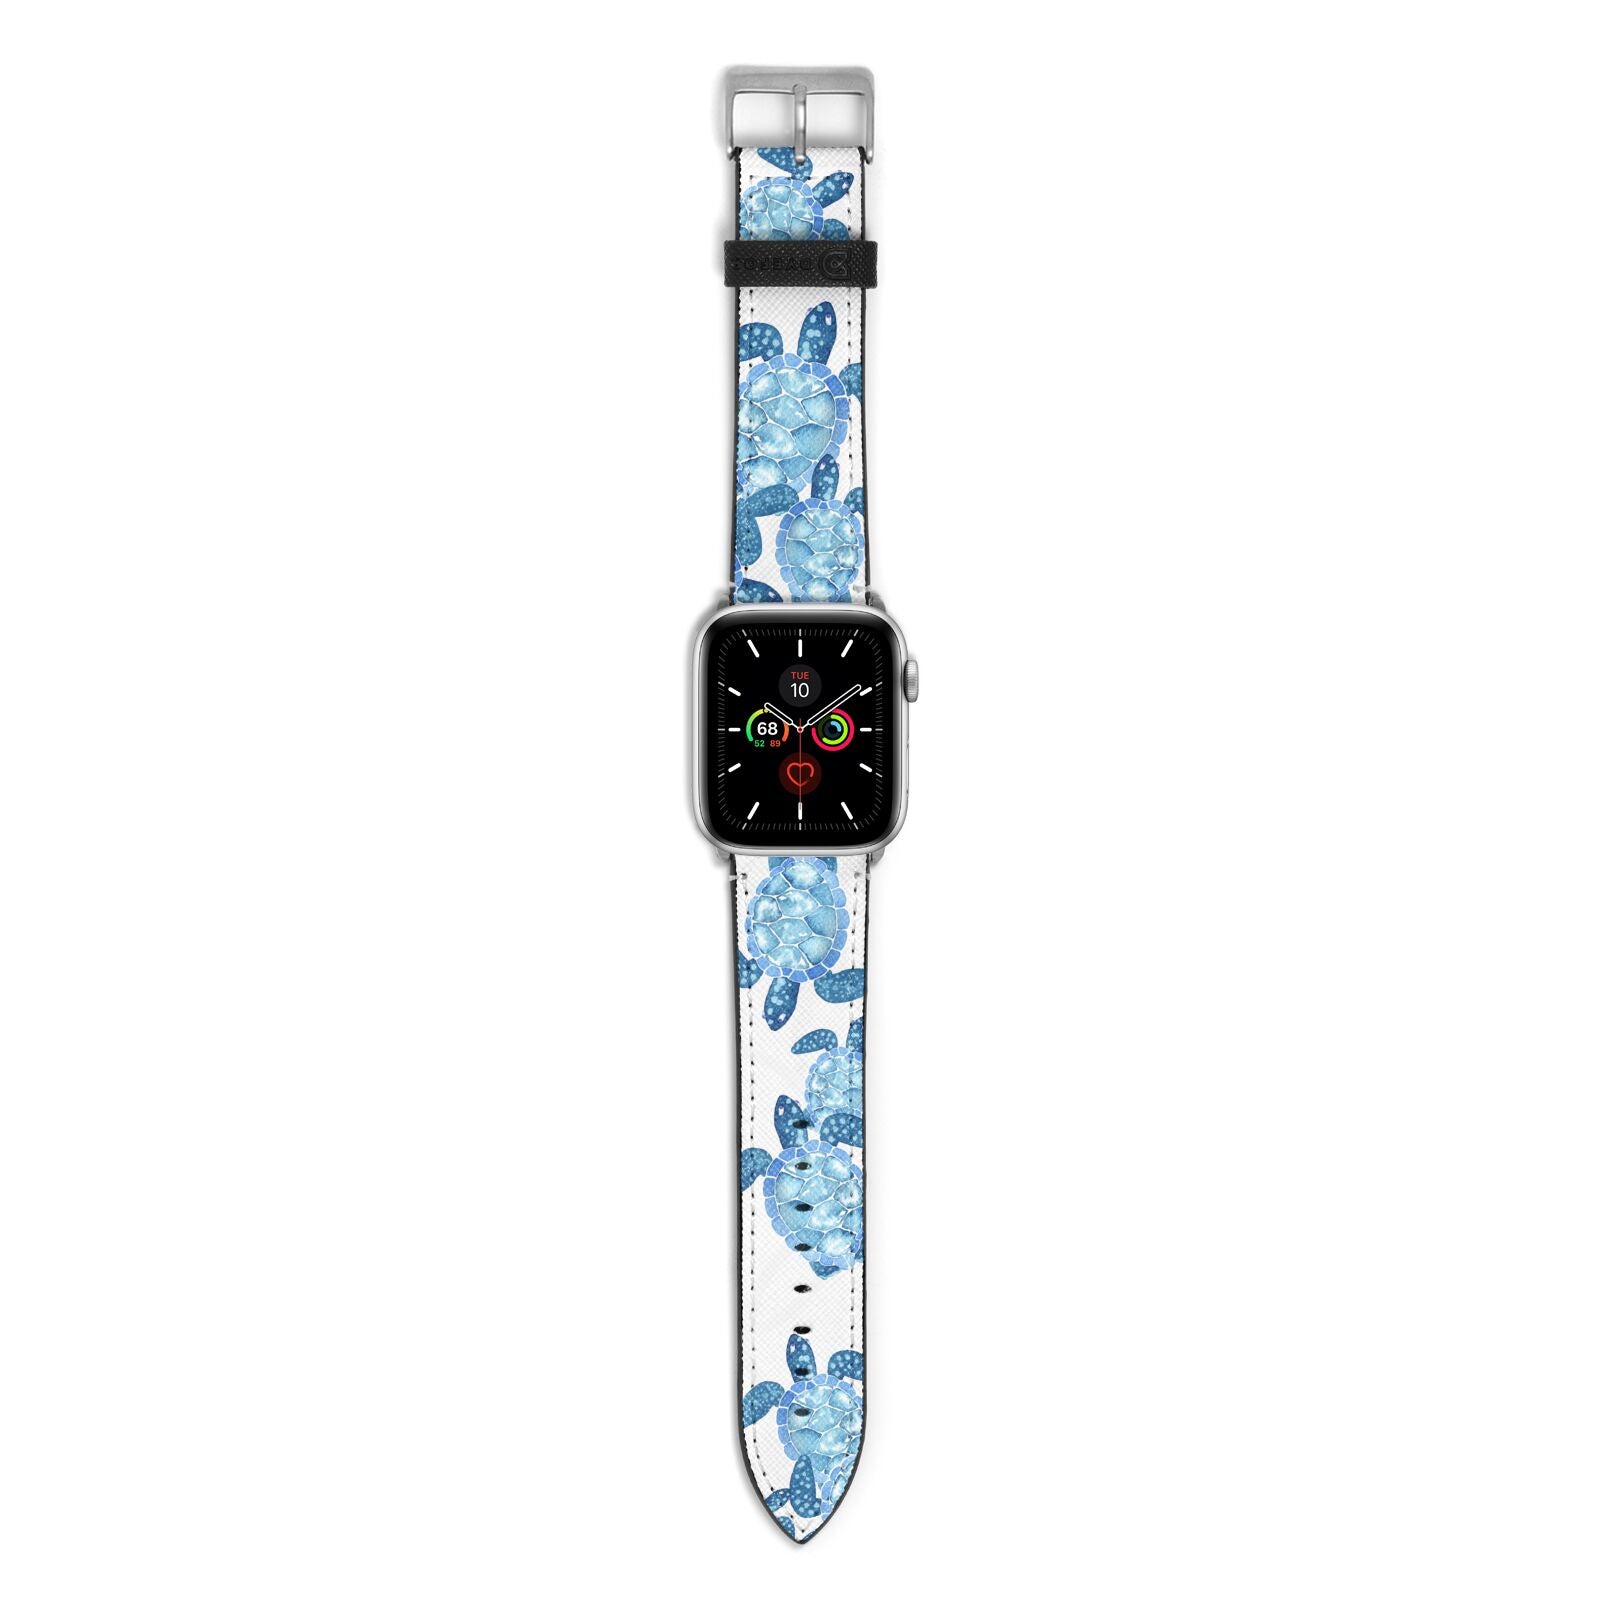 Turtle Apple Watch Strap with Silver Hardware